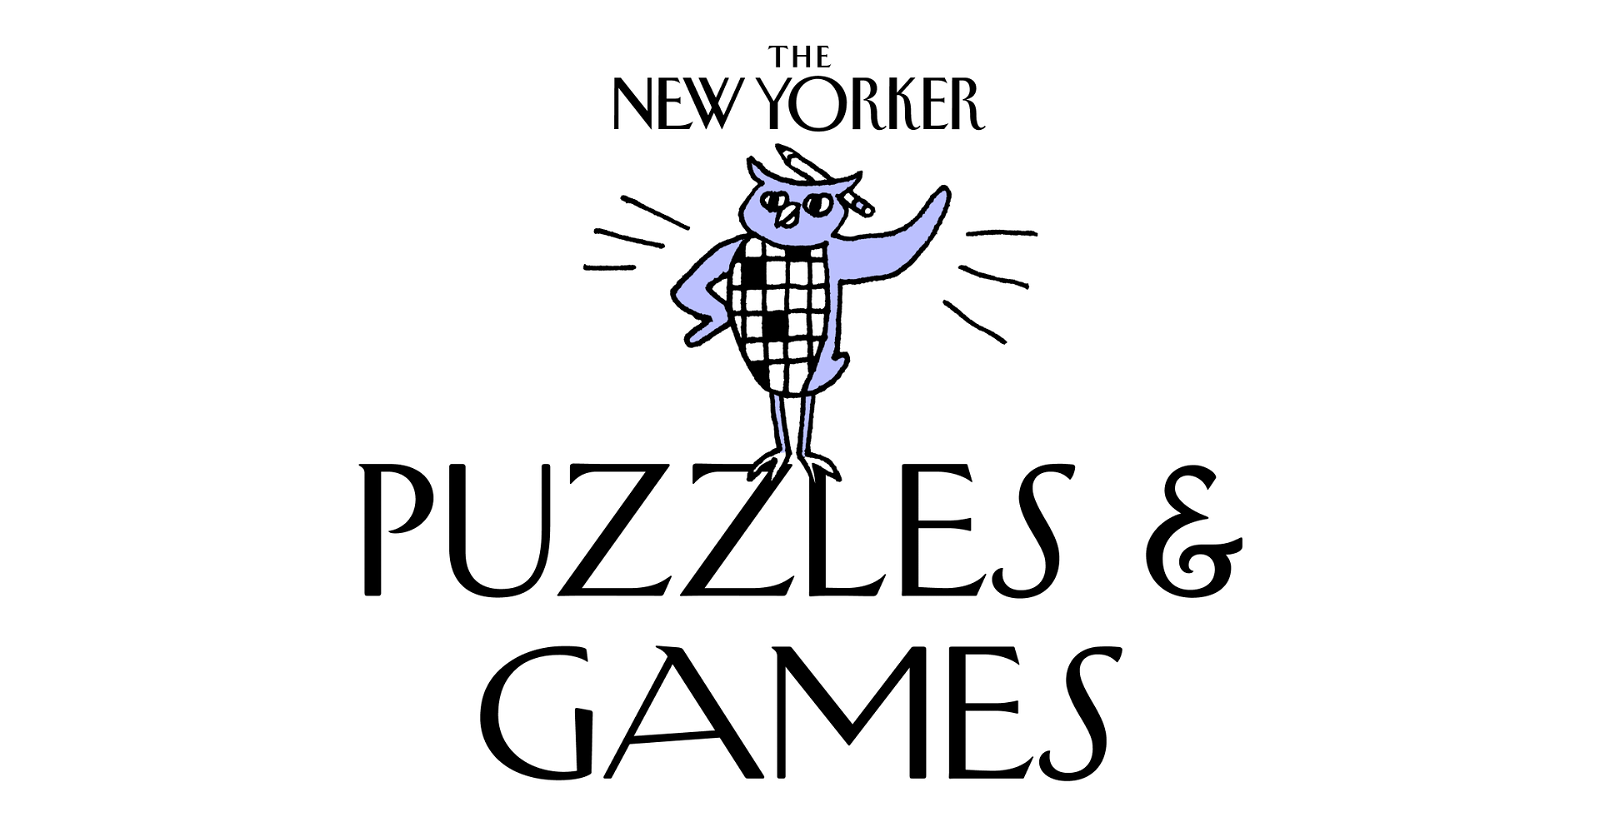 THE NEW YORKER | PUZZLES AND GAMES